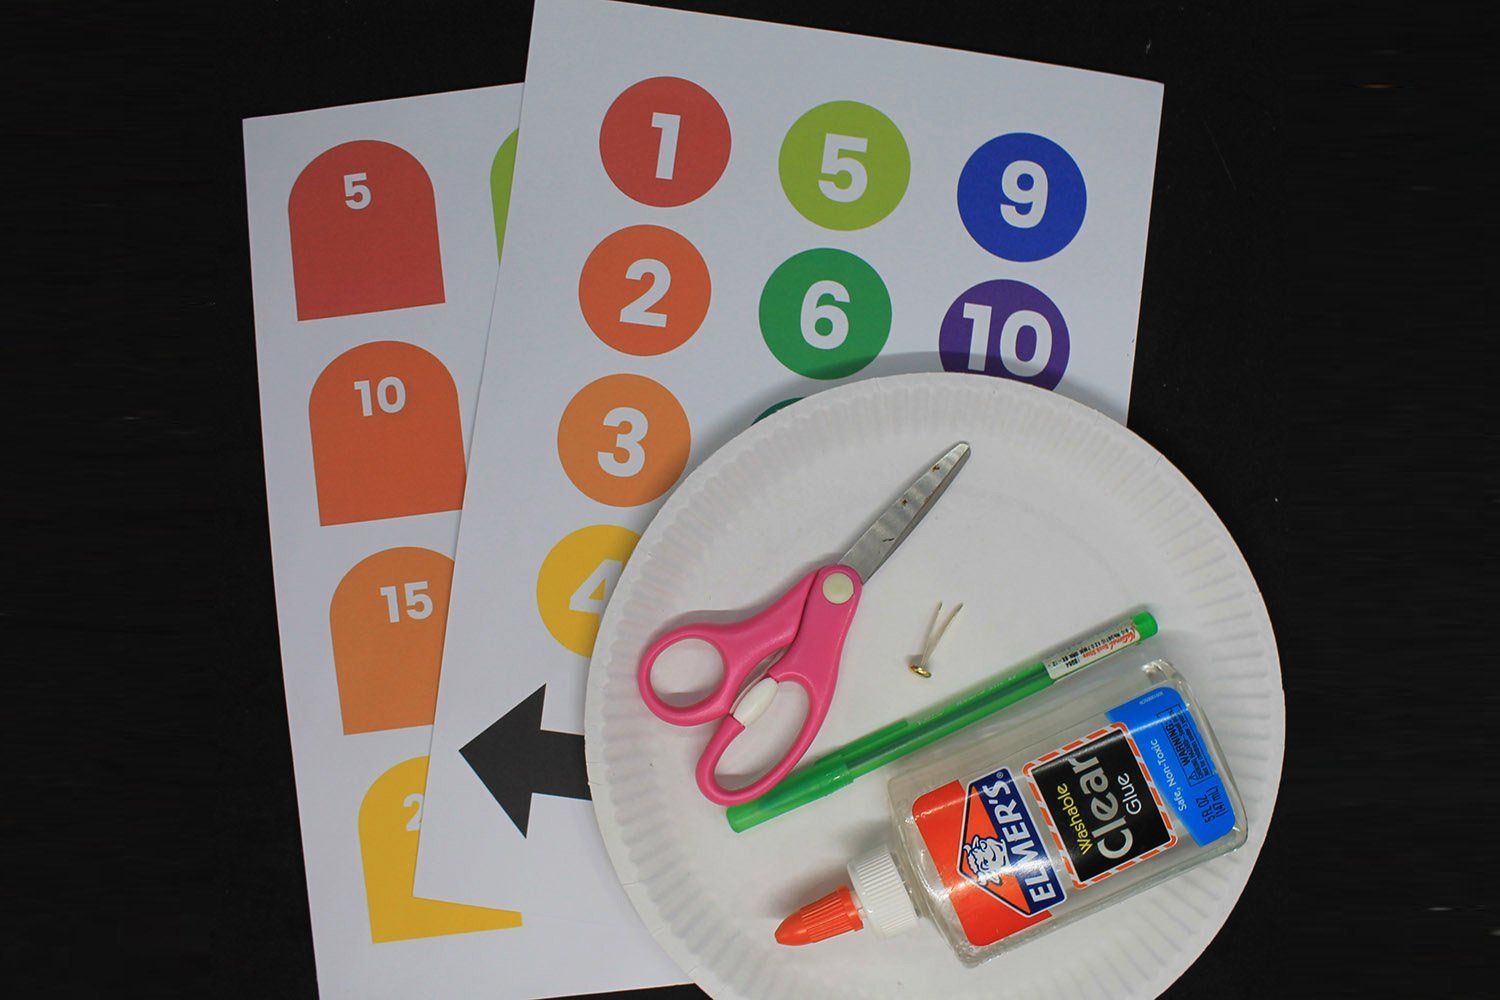 How to Make a Paper Plate Clock - Materials